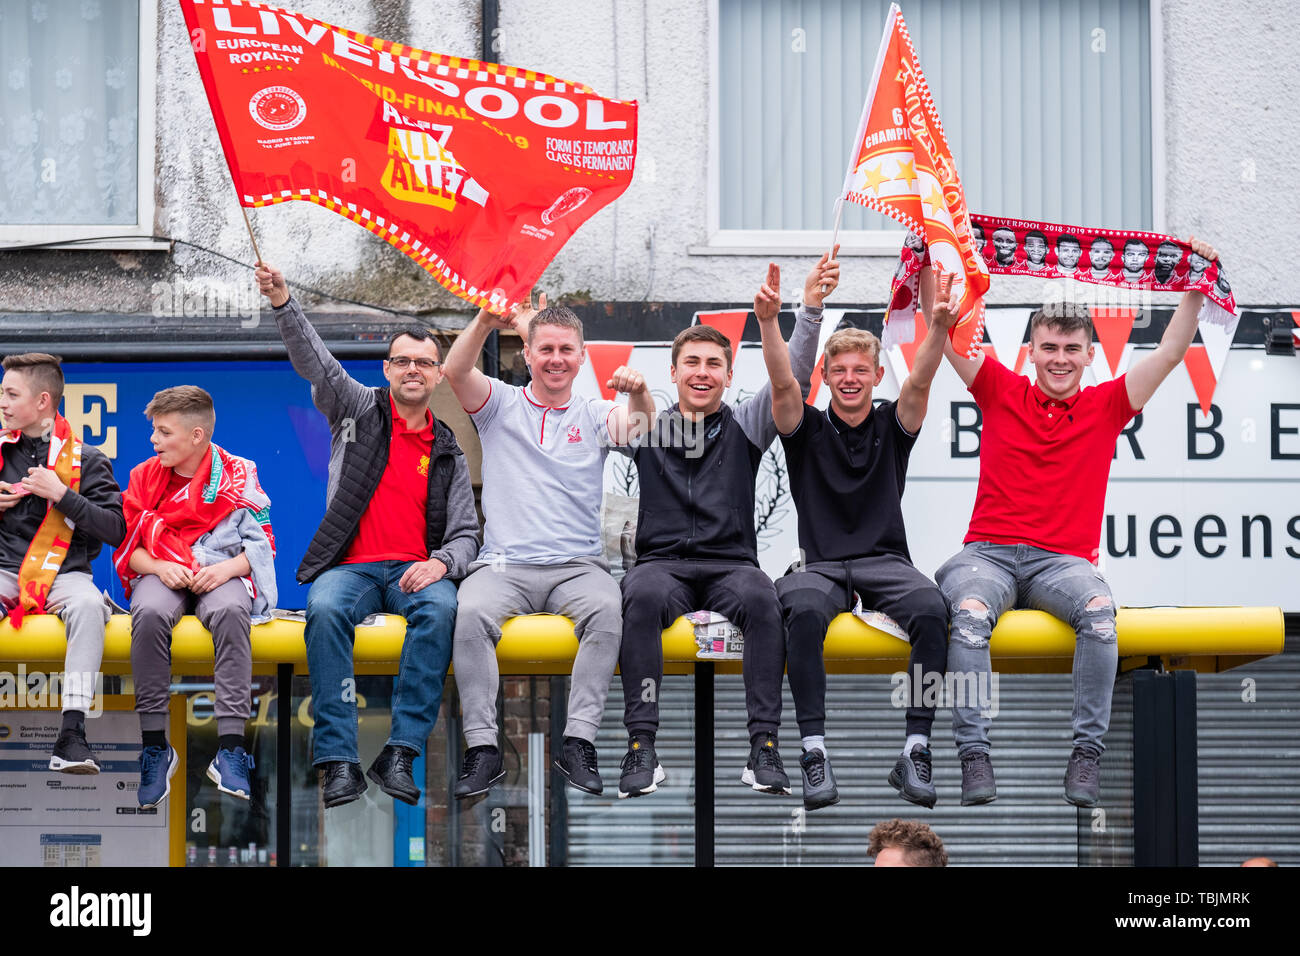 June 2, 2019: Liverpool, UK. Following their Champions League success last night, fans gather to see Liverpool Football Club parade the Champions League trophy on an open top bus through the Old Swan area of Liverpool, from there the open top bus will make its way into the city centre. Stock Photo